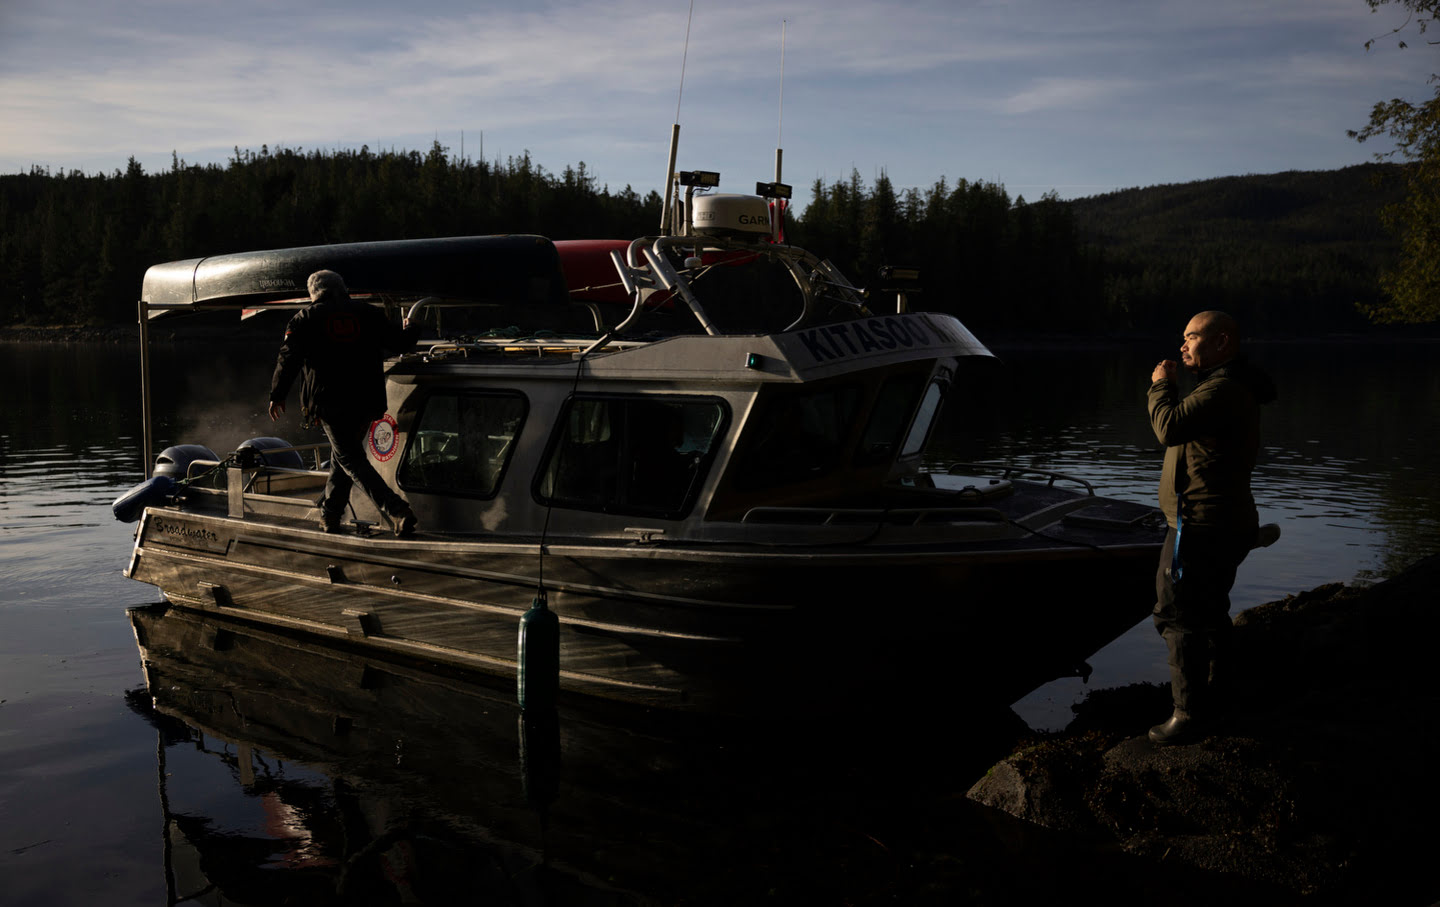 Indigenous-Led Marine Protection Sets a Course Along Canada’s Pacific